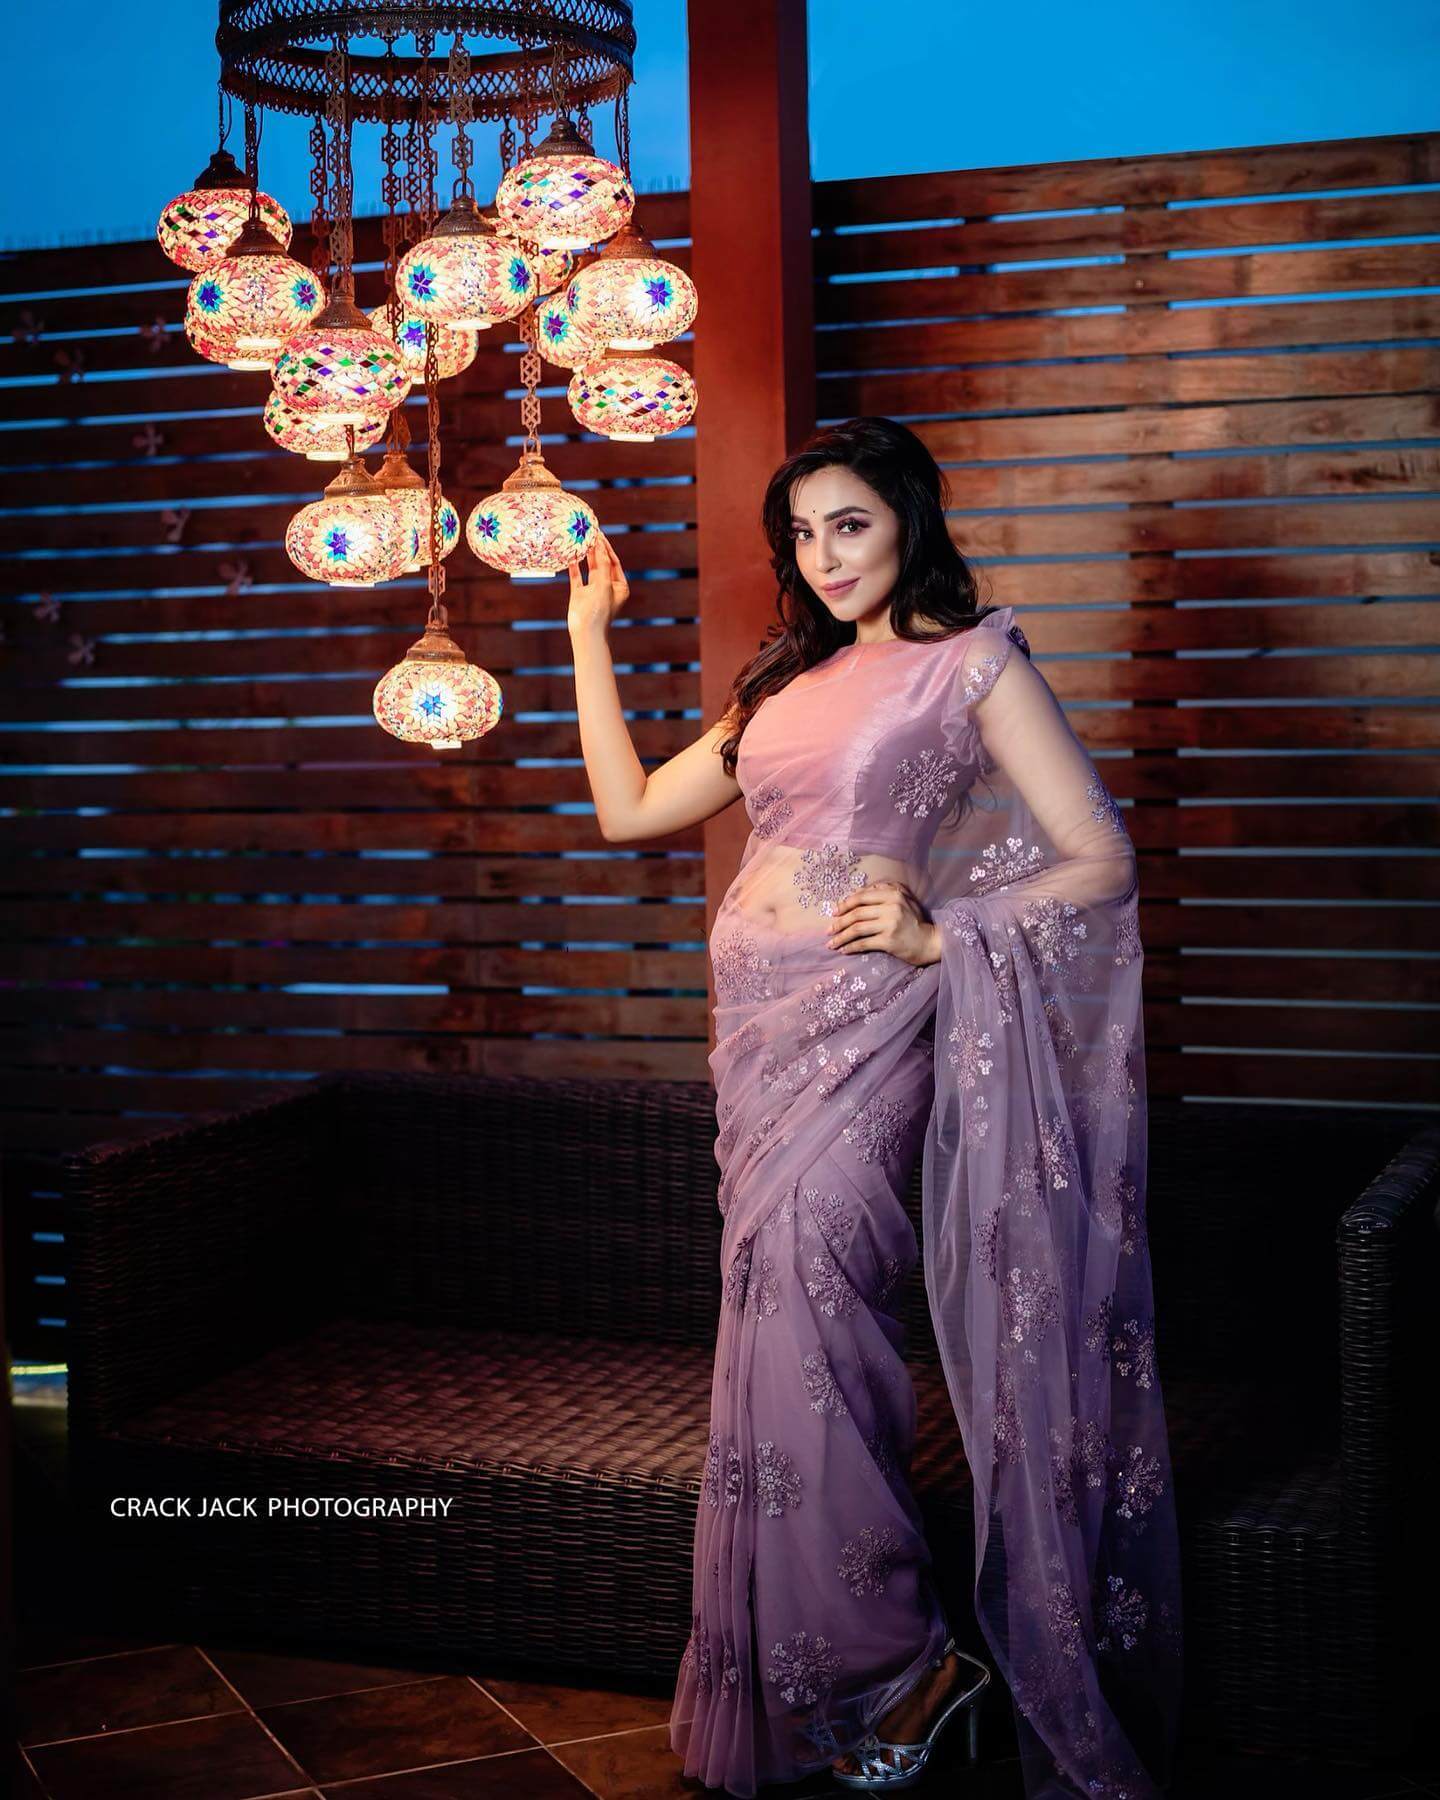 Parvathy Nair In Mauve Net Saree - Traditional Outfits & Looks